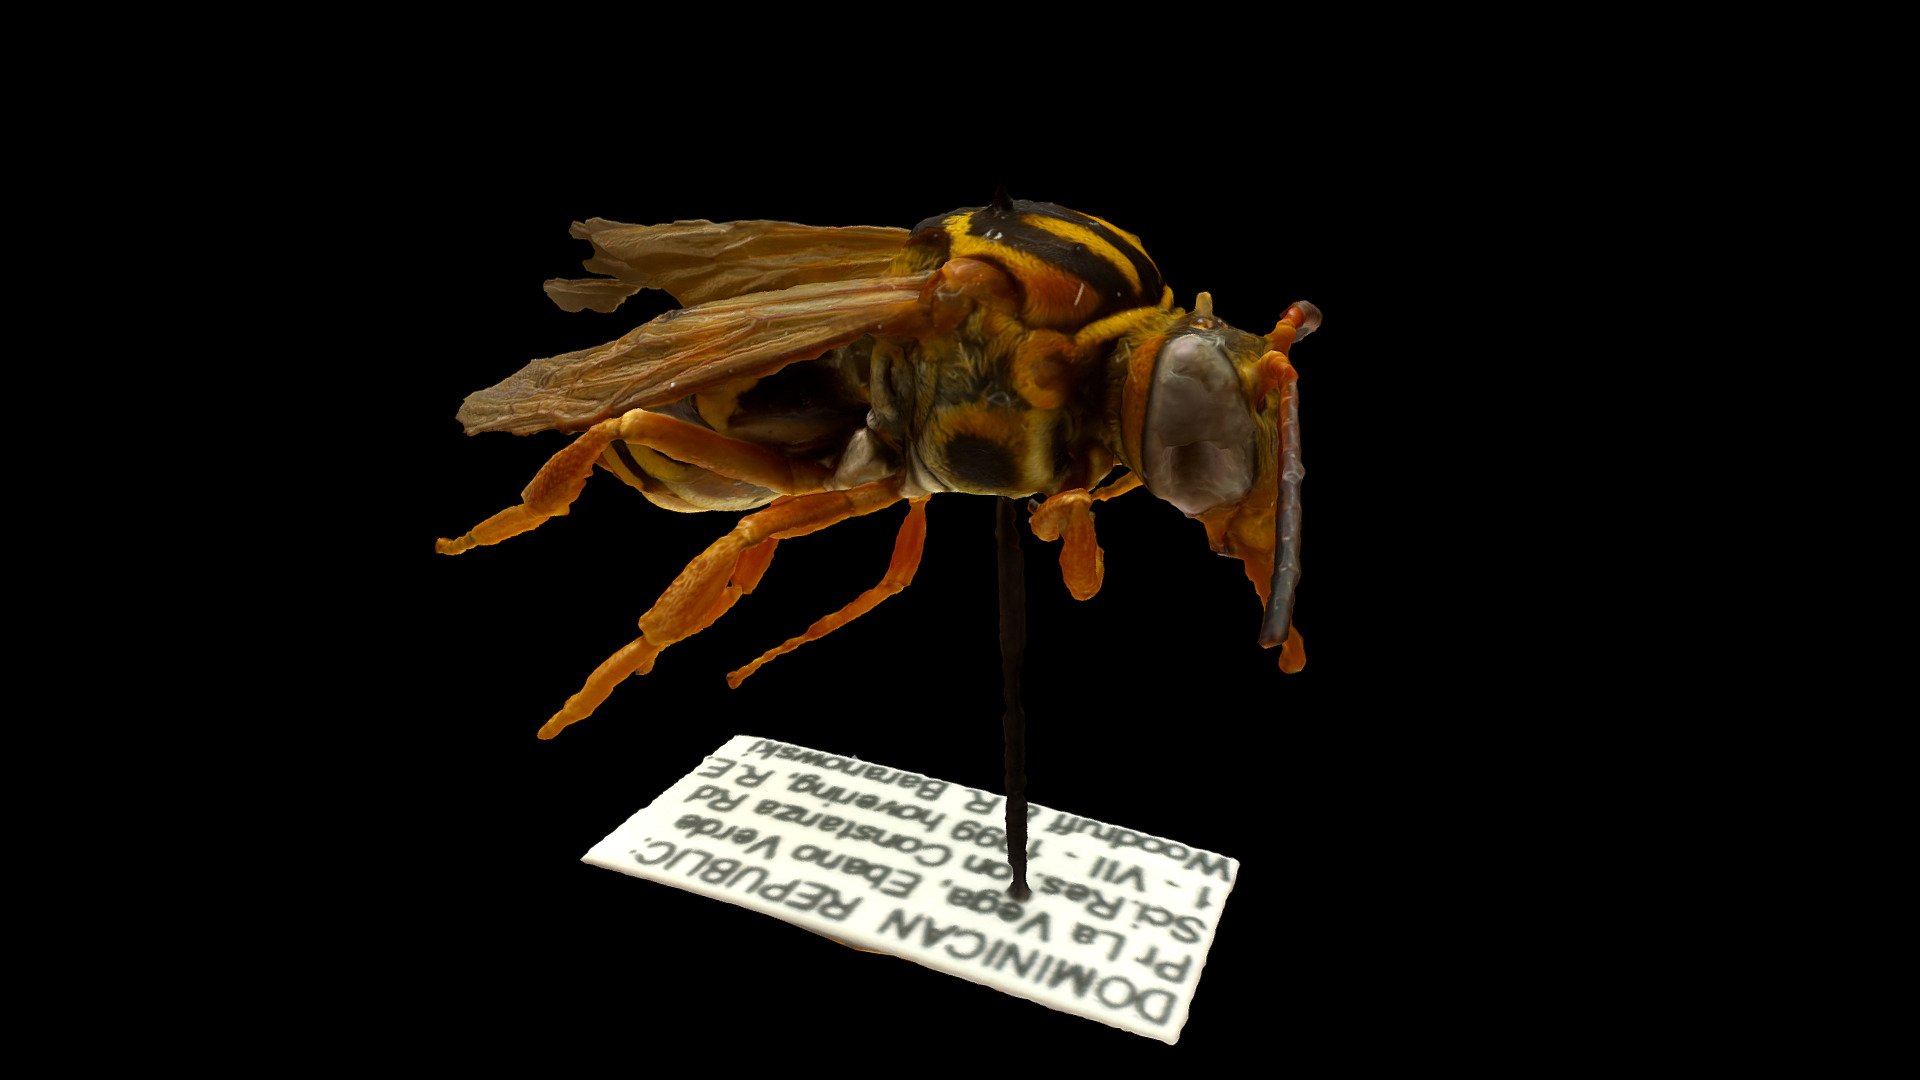 Cuckoo bee, Triepeolus sp.  from Florida State Collection of Arthropods (FSCA 00094019).

Photogrammetry scan by the Florida Museum Digital Imaging division. https://www.floridamuseum.ufl.edu/digital-lab/photogrammetry/ - Cuckoo Bee, Triepeolus - 3D model by FloridaMuseum 3d model